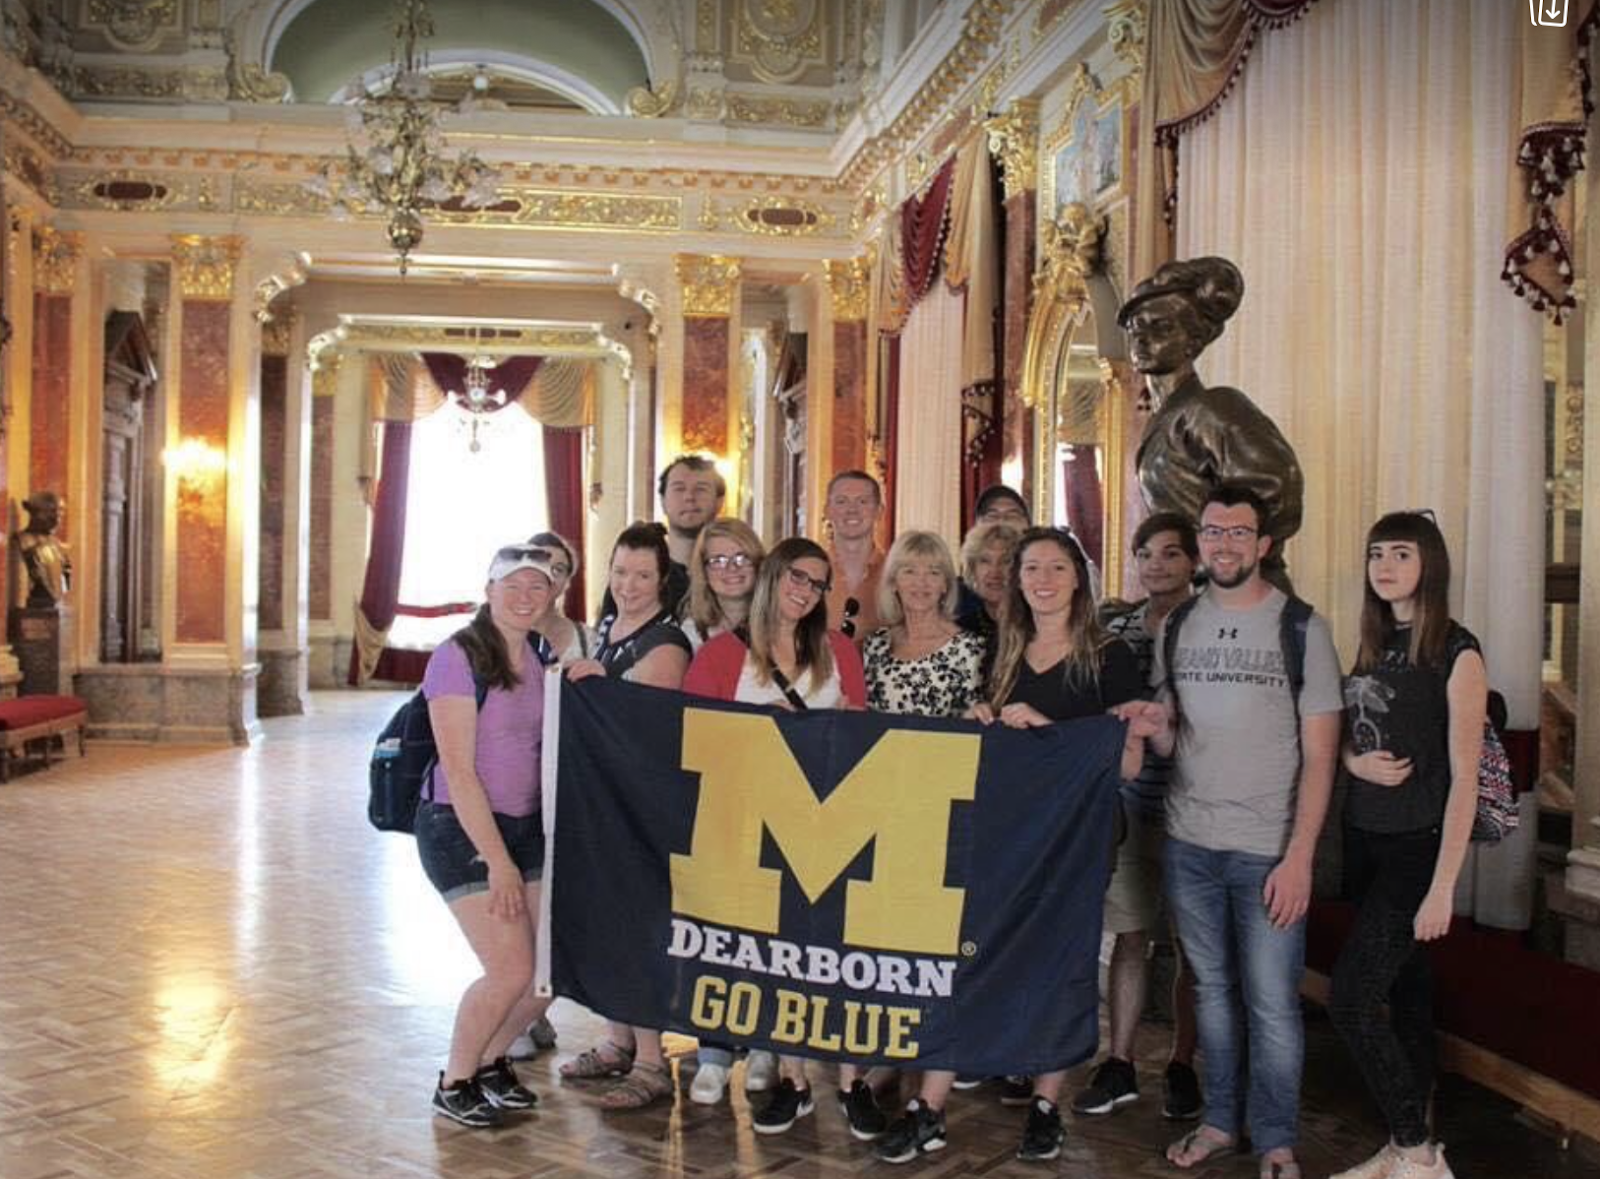 Group of students holding a UM-Dearborn flag in the lobby of a historic building